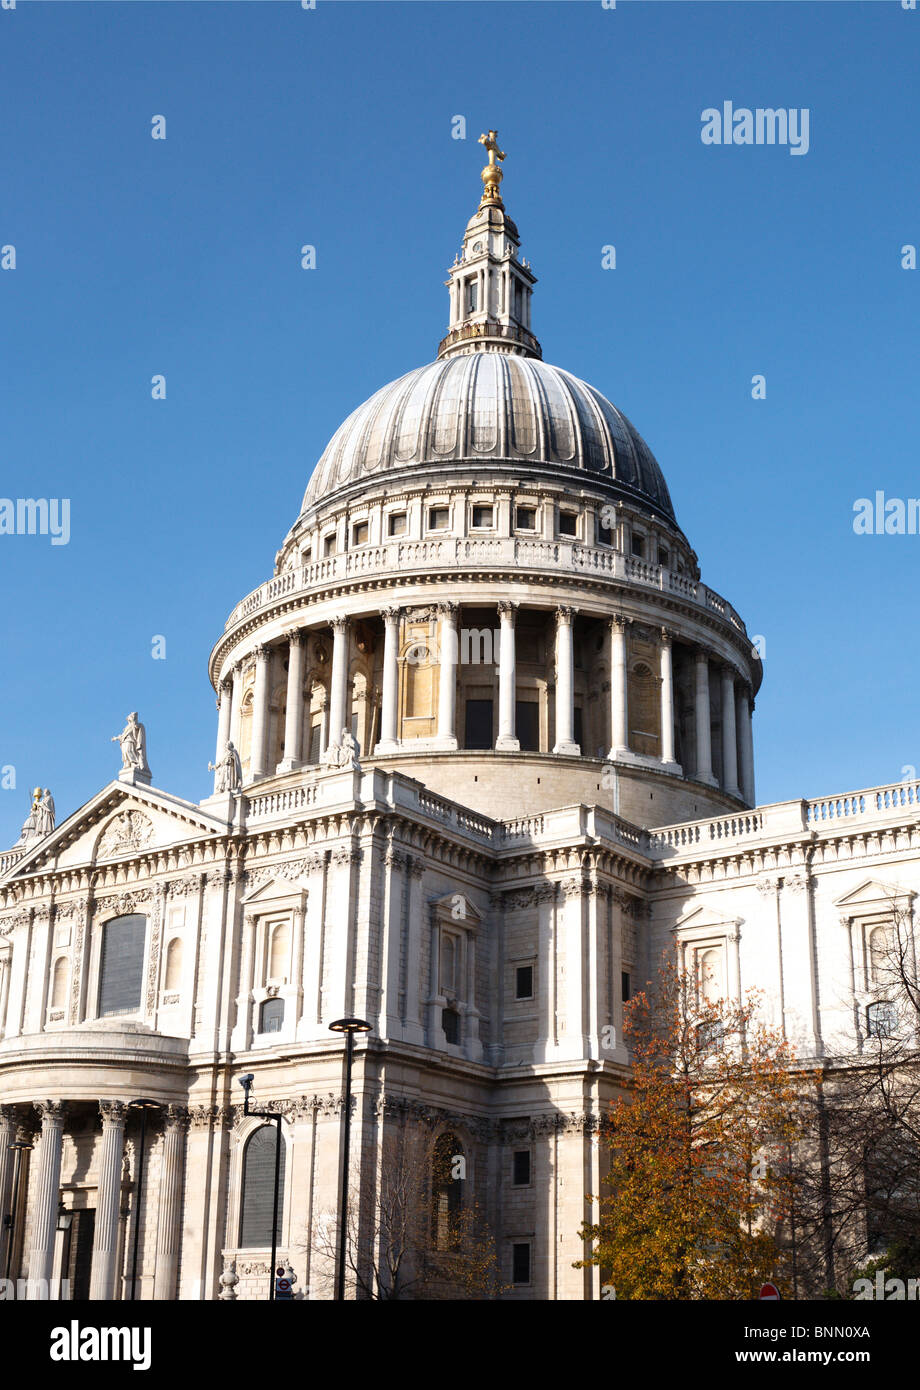 St. Paul's Cathedral seen from the South East in autumn Stock Photo